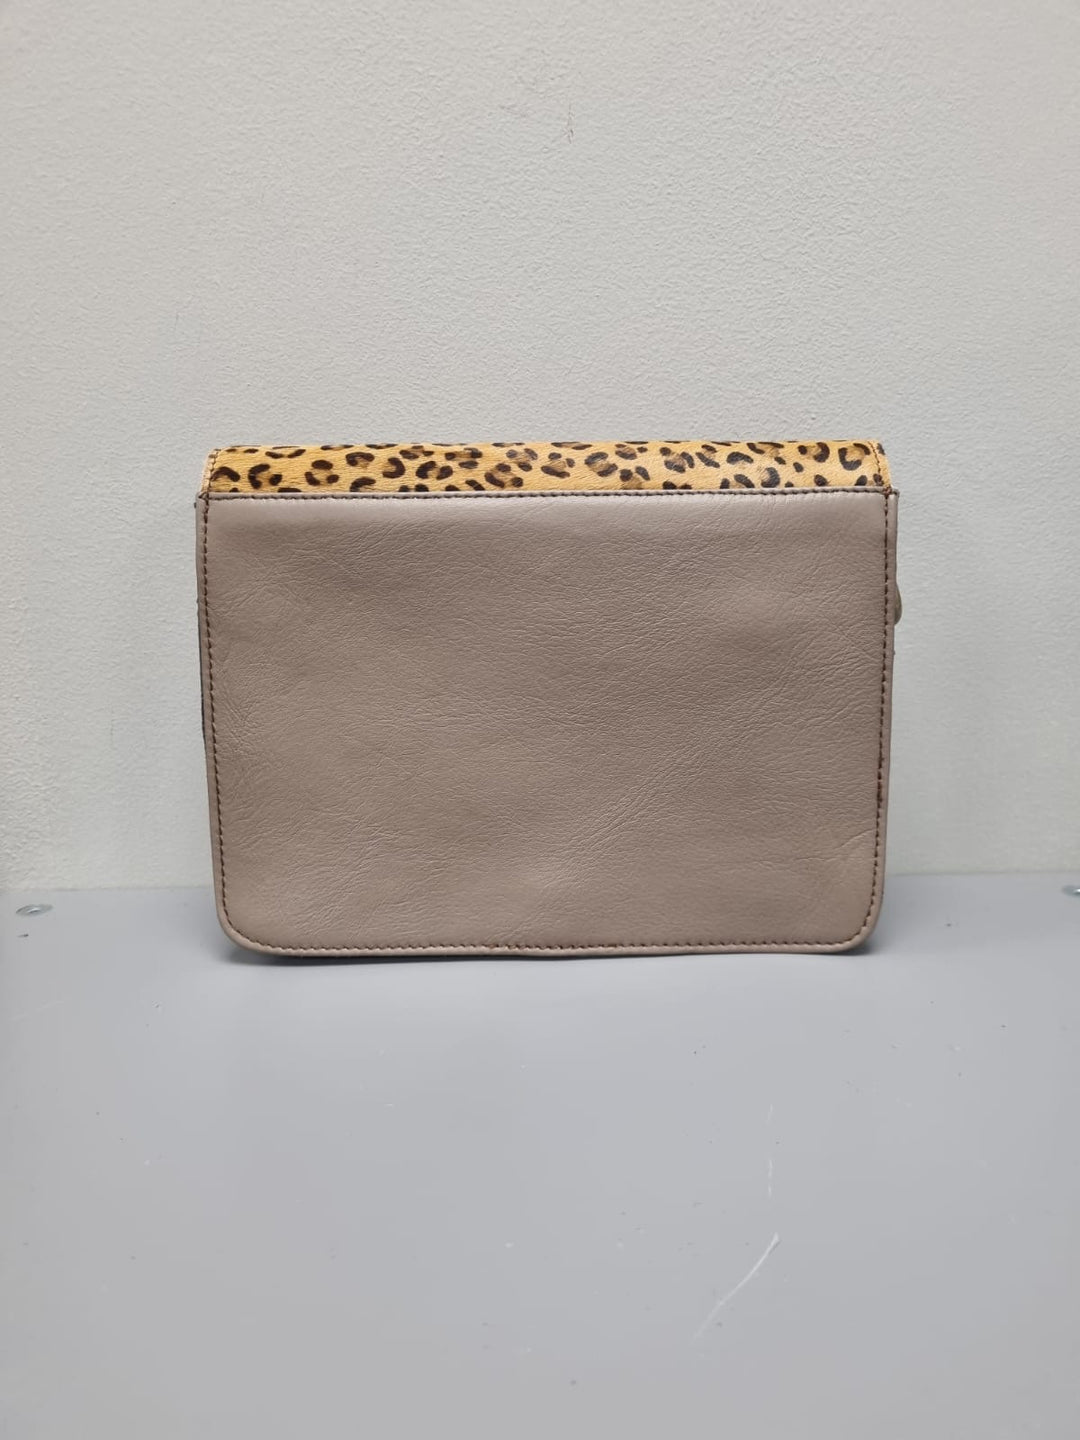 Claire Leather Cross Body Bag - Red Suede and Animal Print